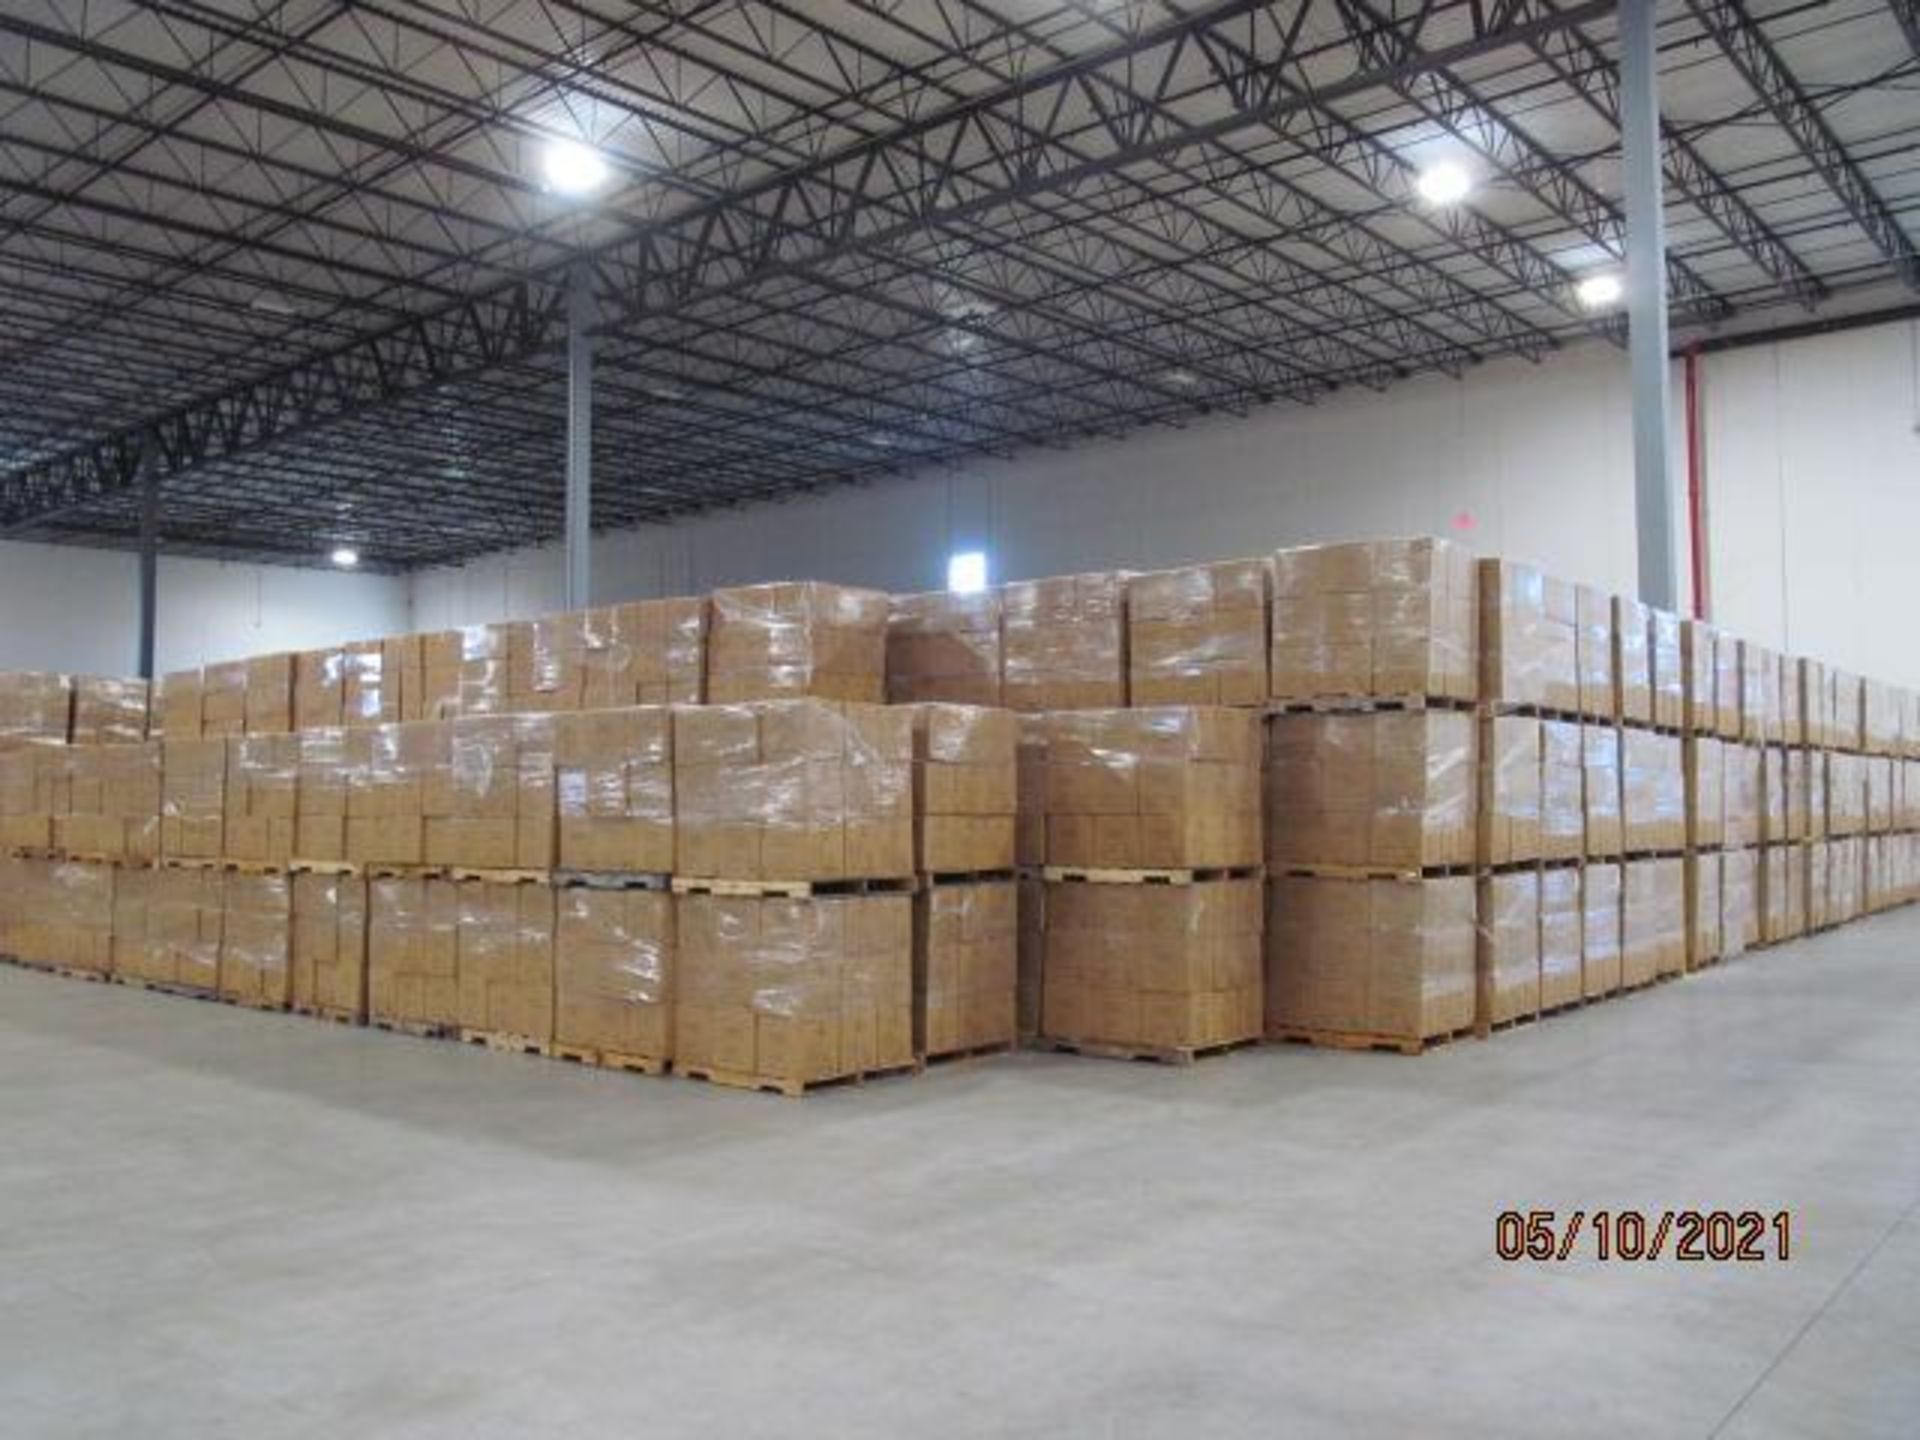 Lot of Waxman Kleen Freak Sanitizing Wipes consisting of 134,784 packages on 208 pallets. Each packa - Image 11 of 11